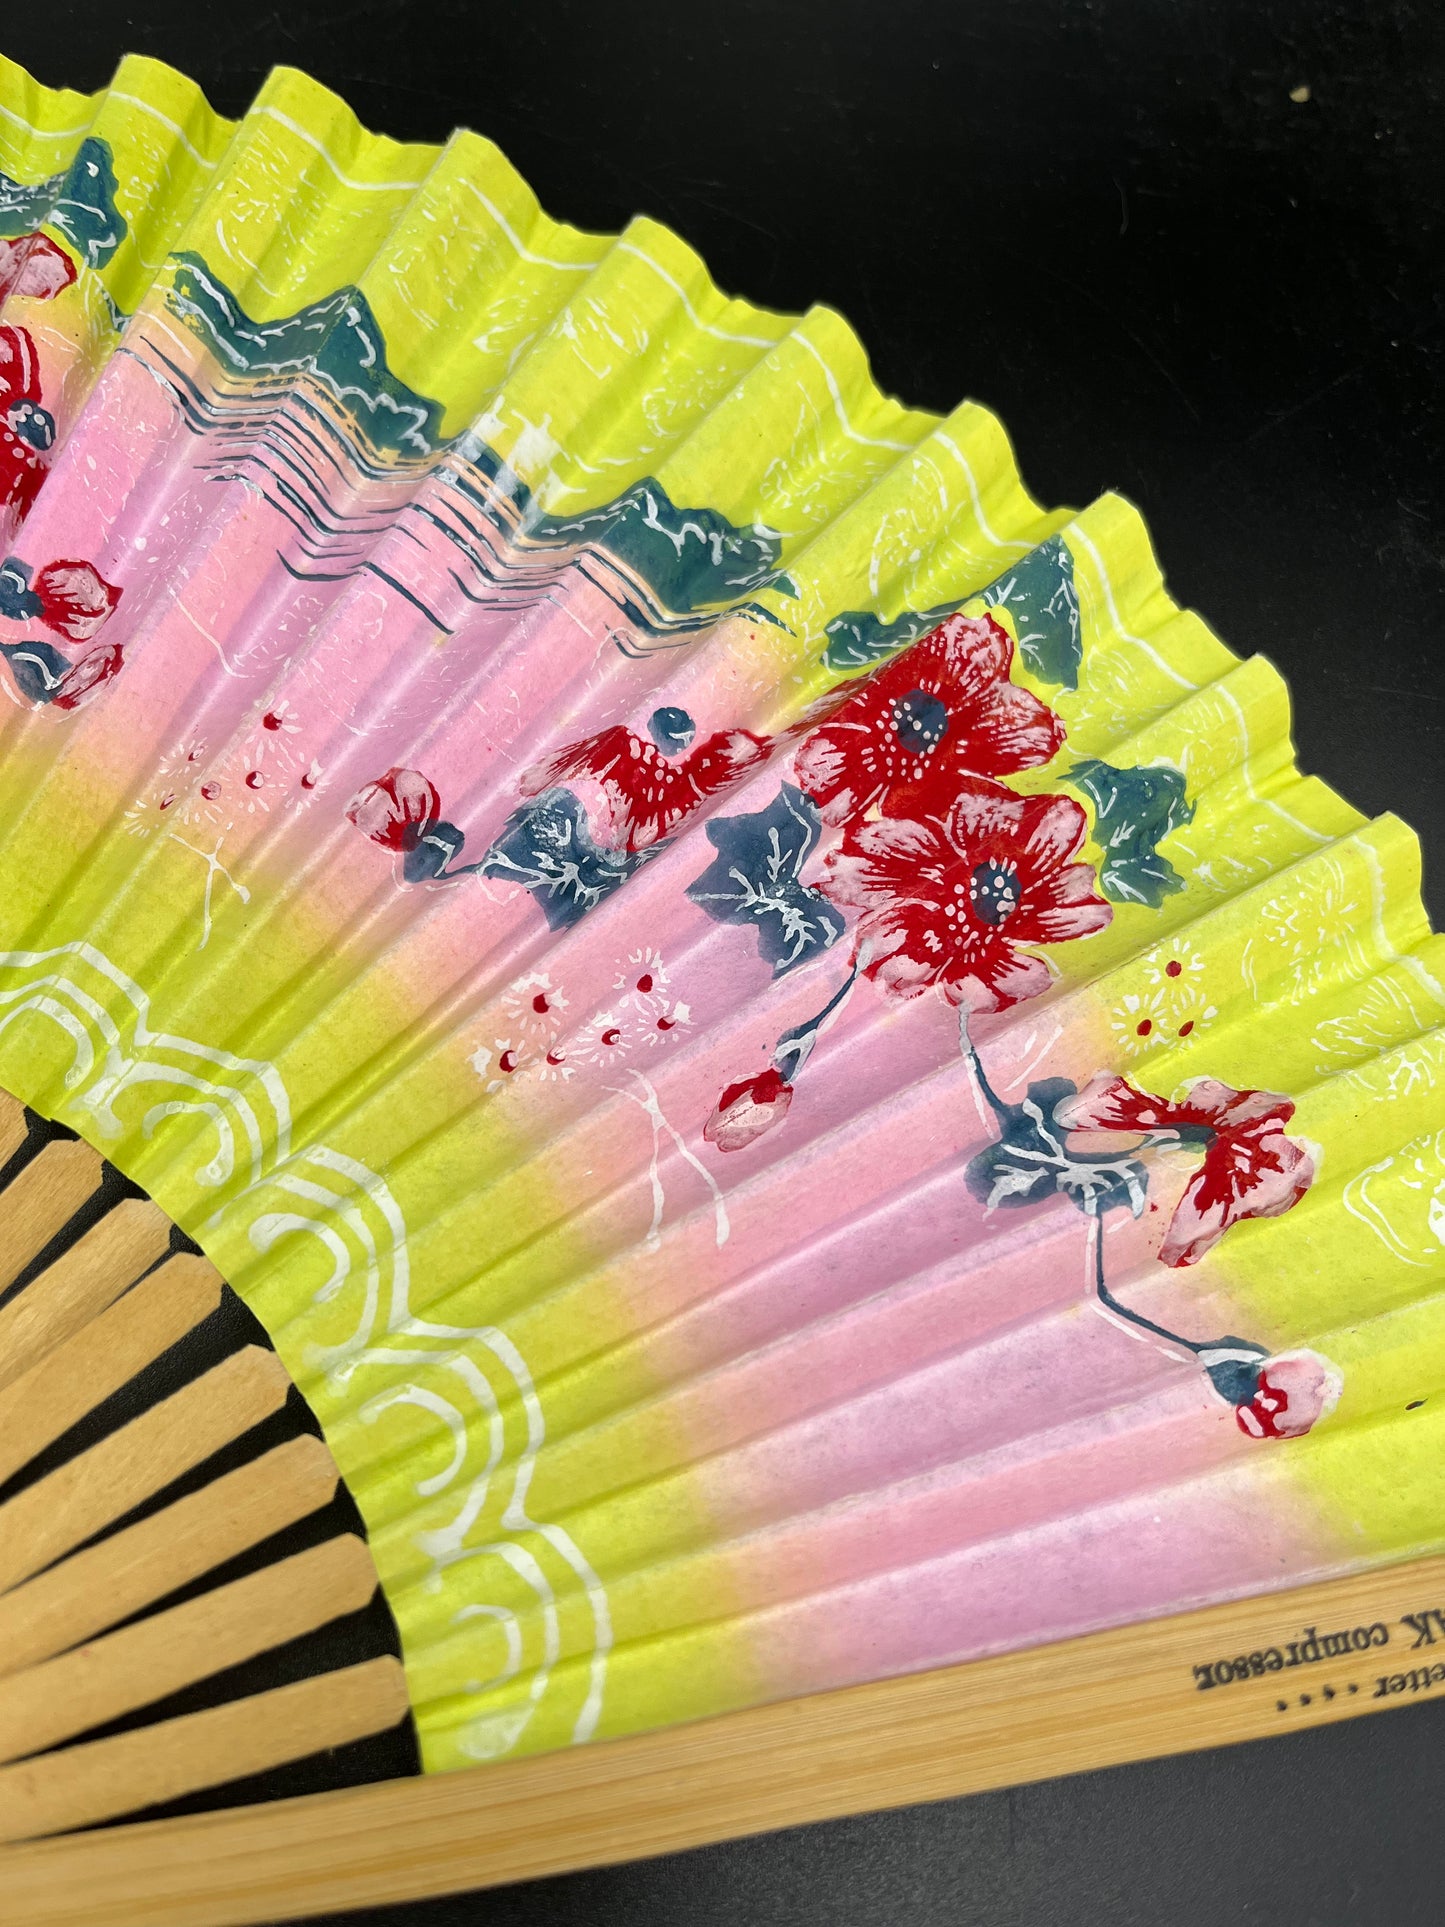 Hand fan promotion from Centri-Stak compressor